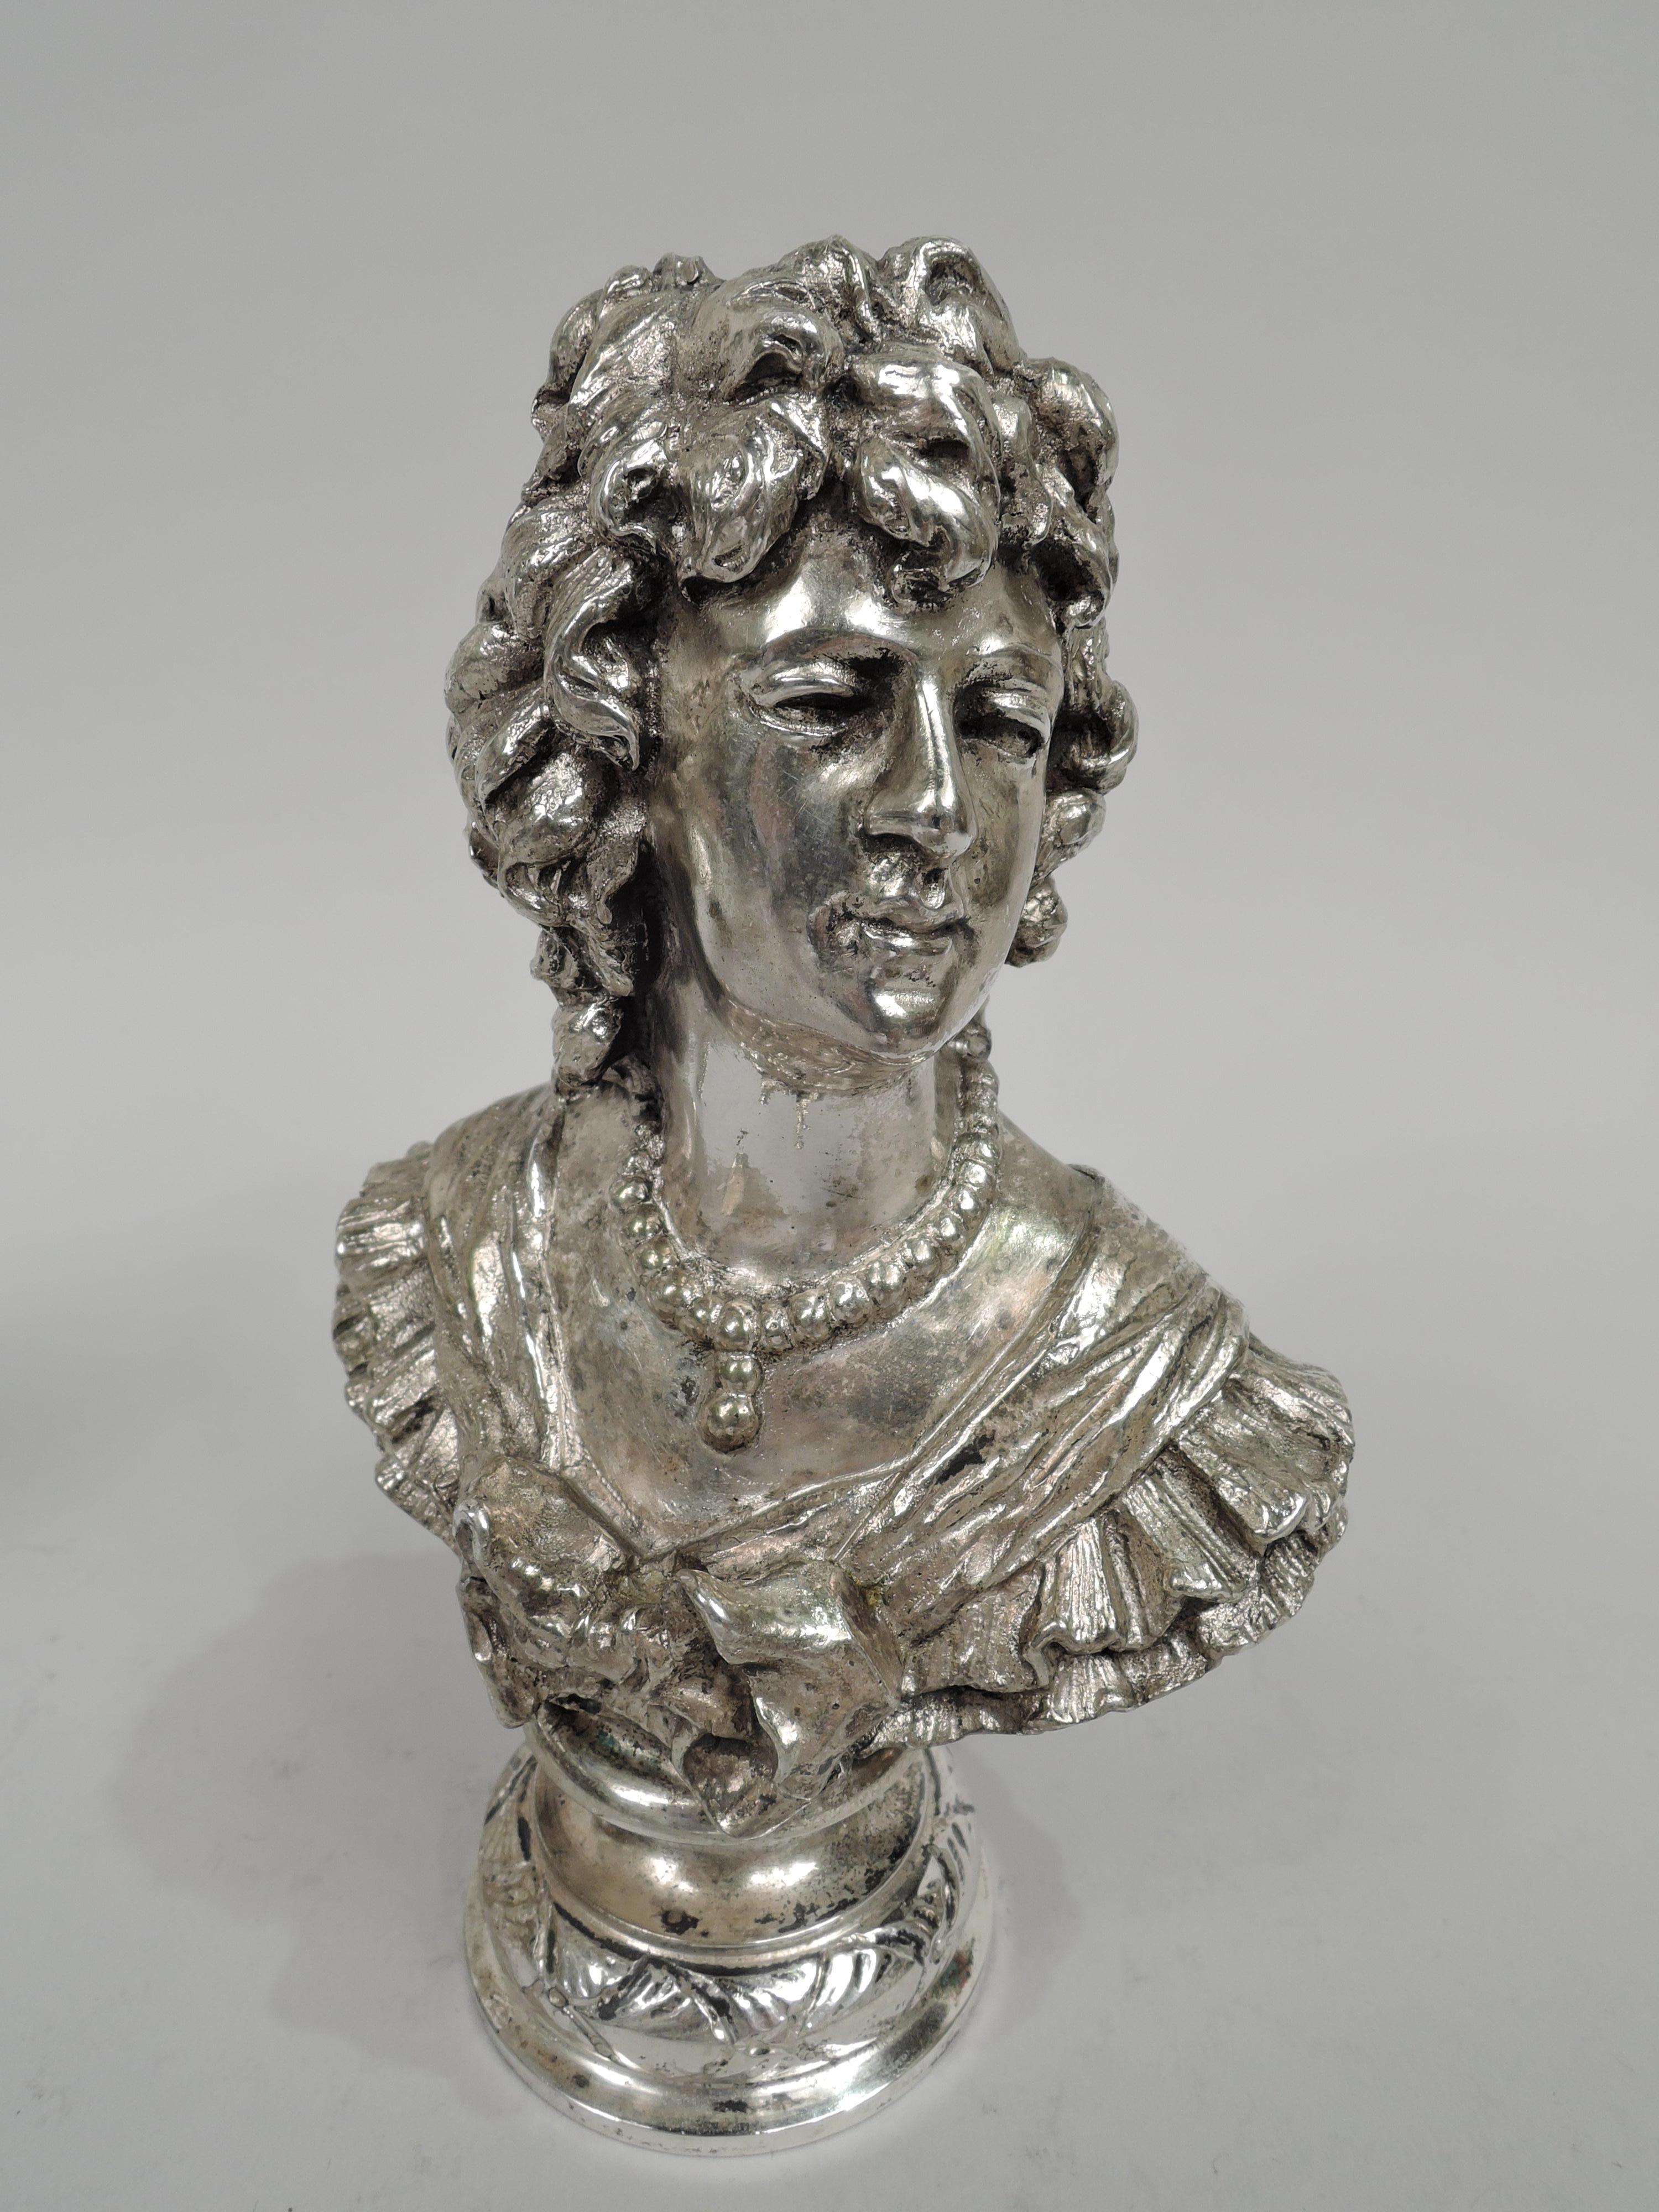 19th Century Pair of Antique Silver Busts of Ancien Regime Courtiers